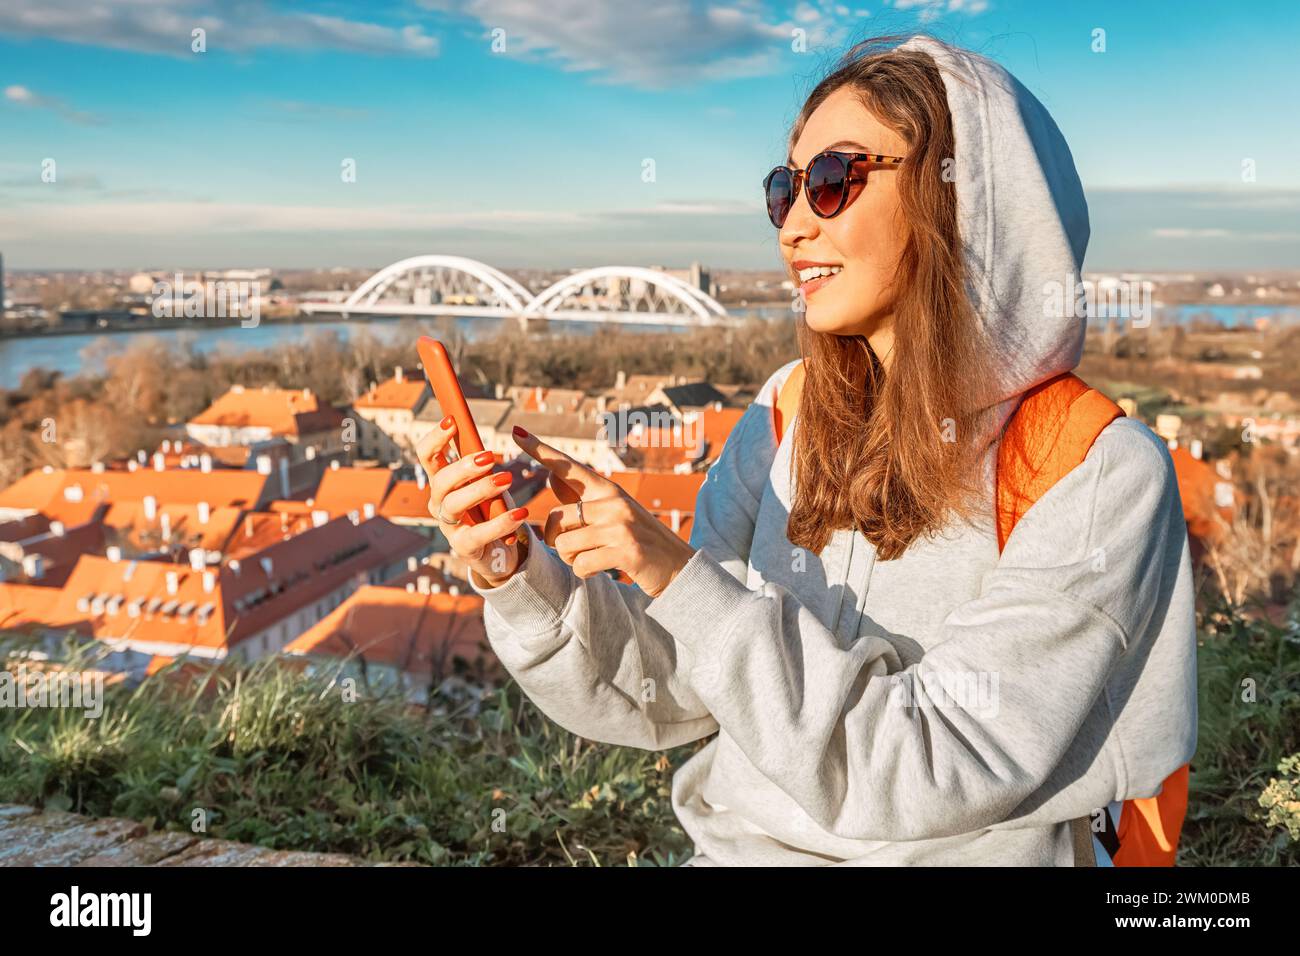 Amidst the charm of Novi Sad, a young traveler navigates the city streets, smartphone in hand, exploring its historic landmarks Stock Photo